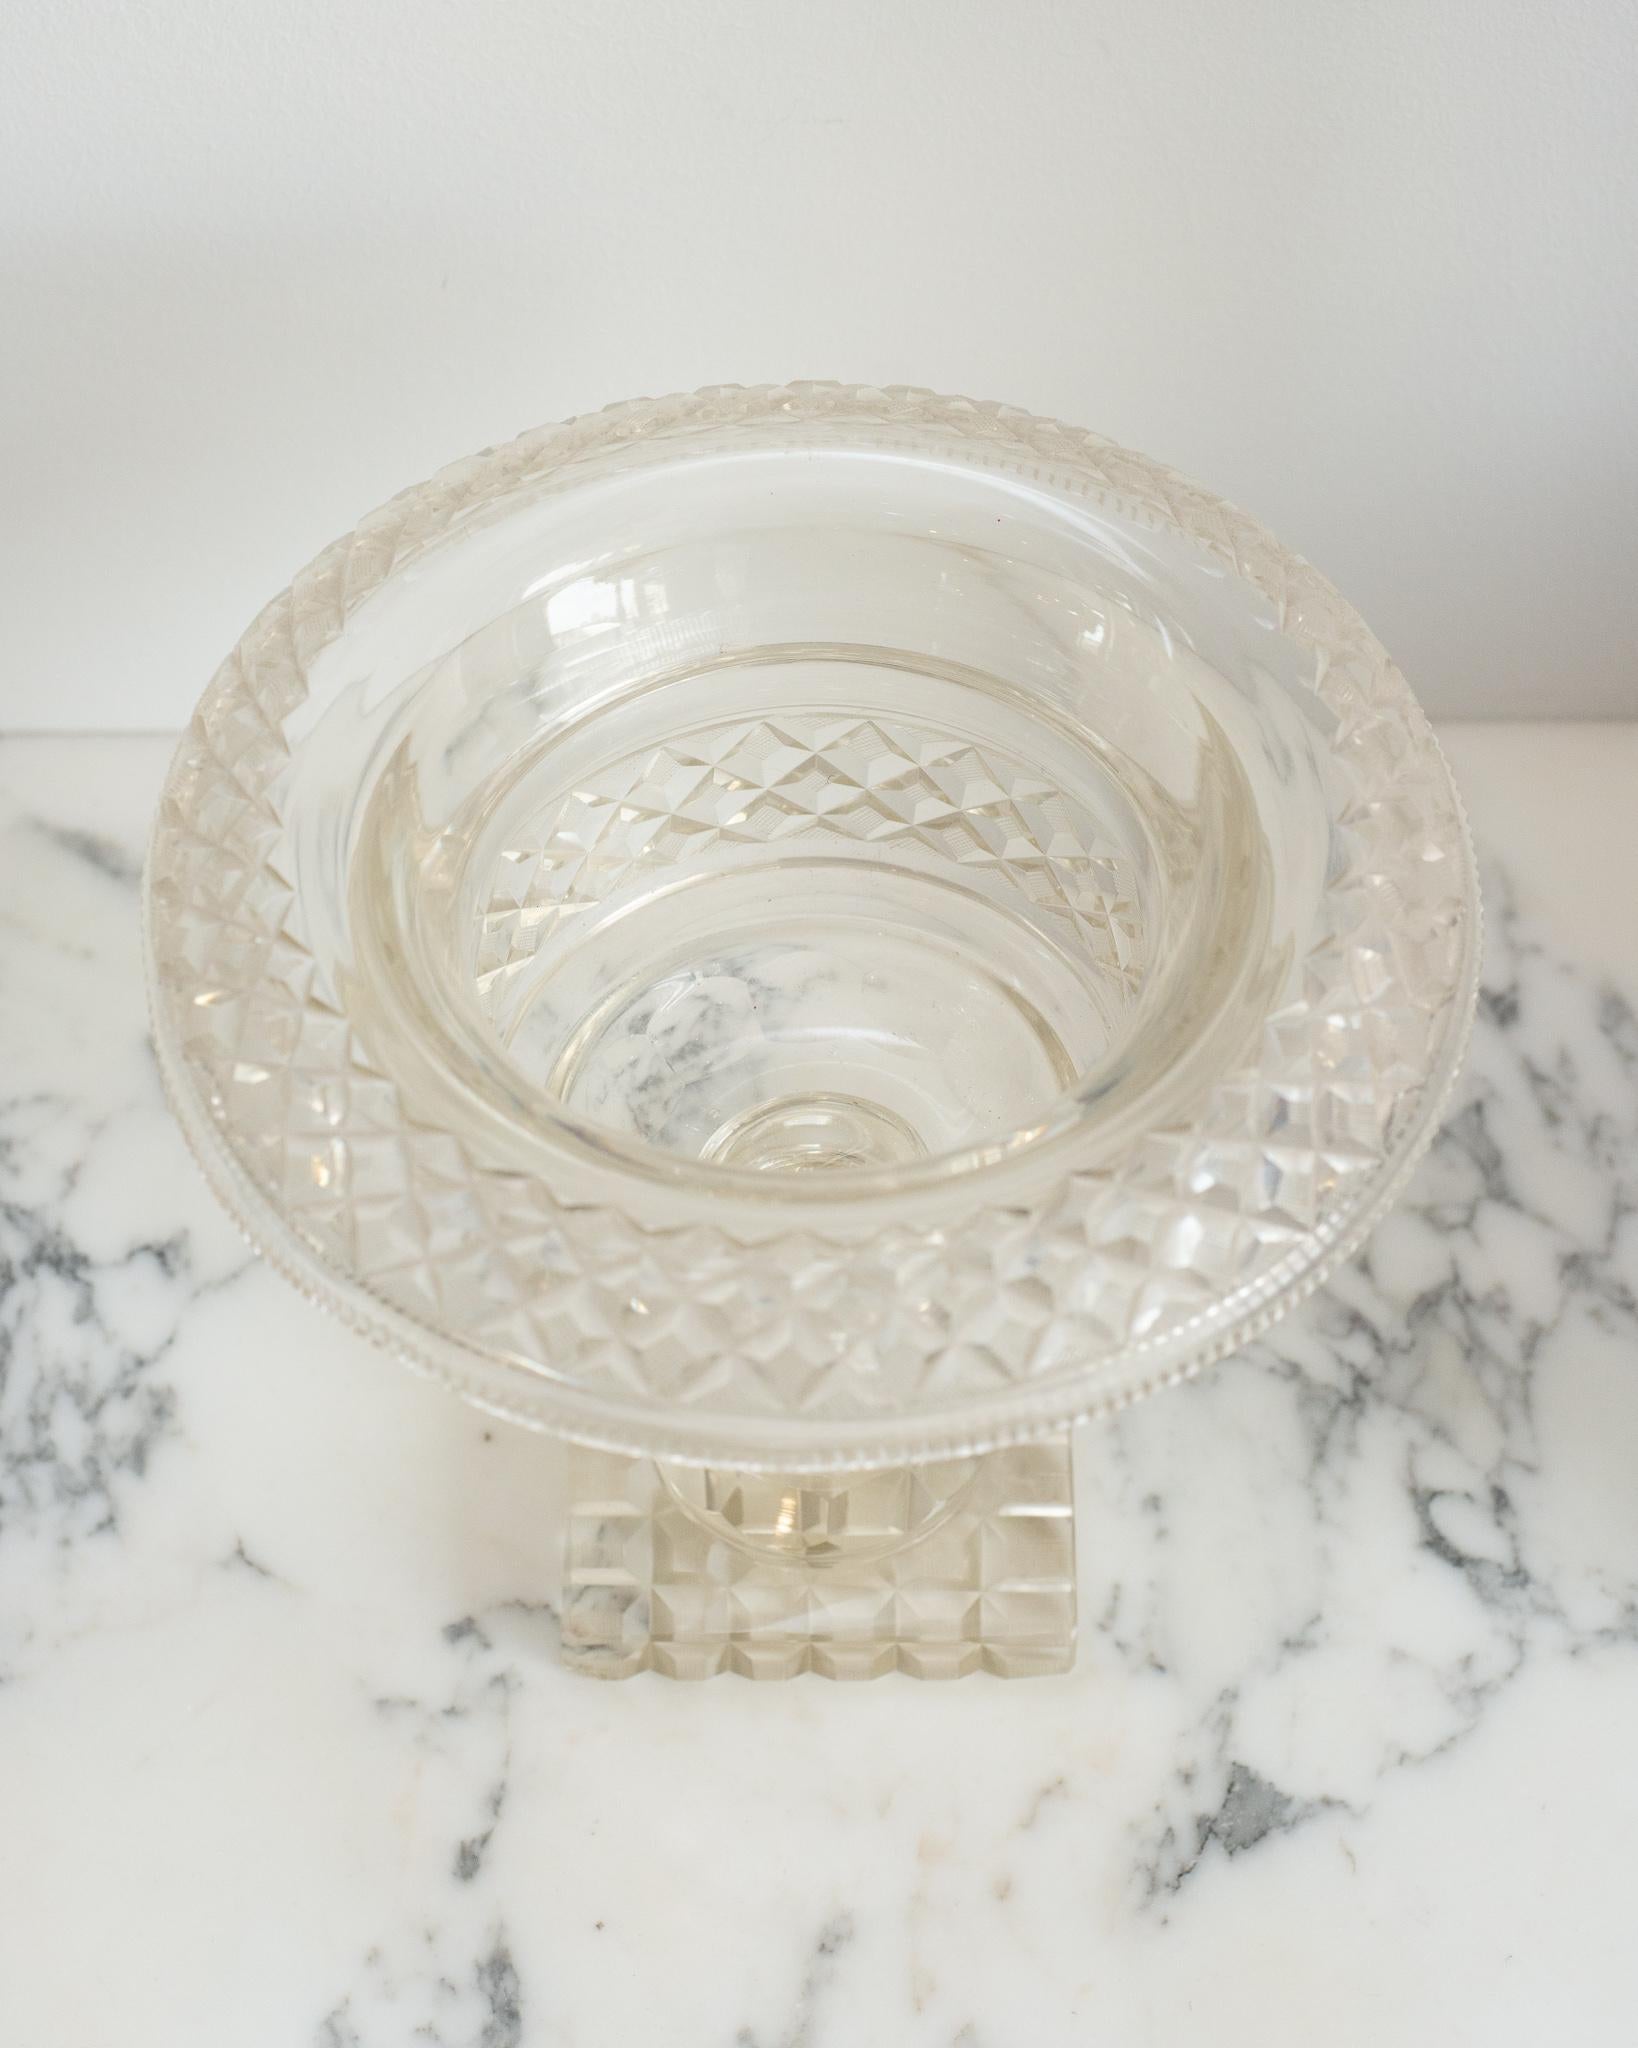 This antique Irish cut crystal decorative bowl with a rolled edge is a Classic accessory that is easy to place in any home. Perfect for serving or decoration, it can be filled fruit or floating flowers.